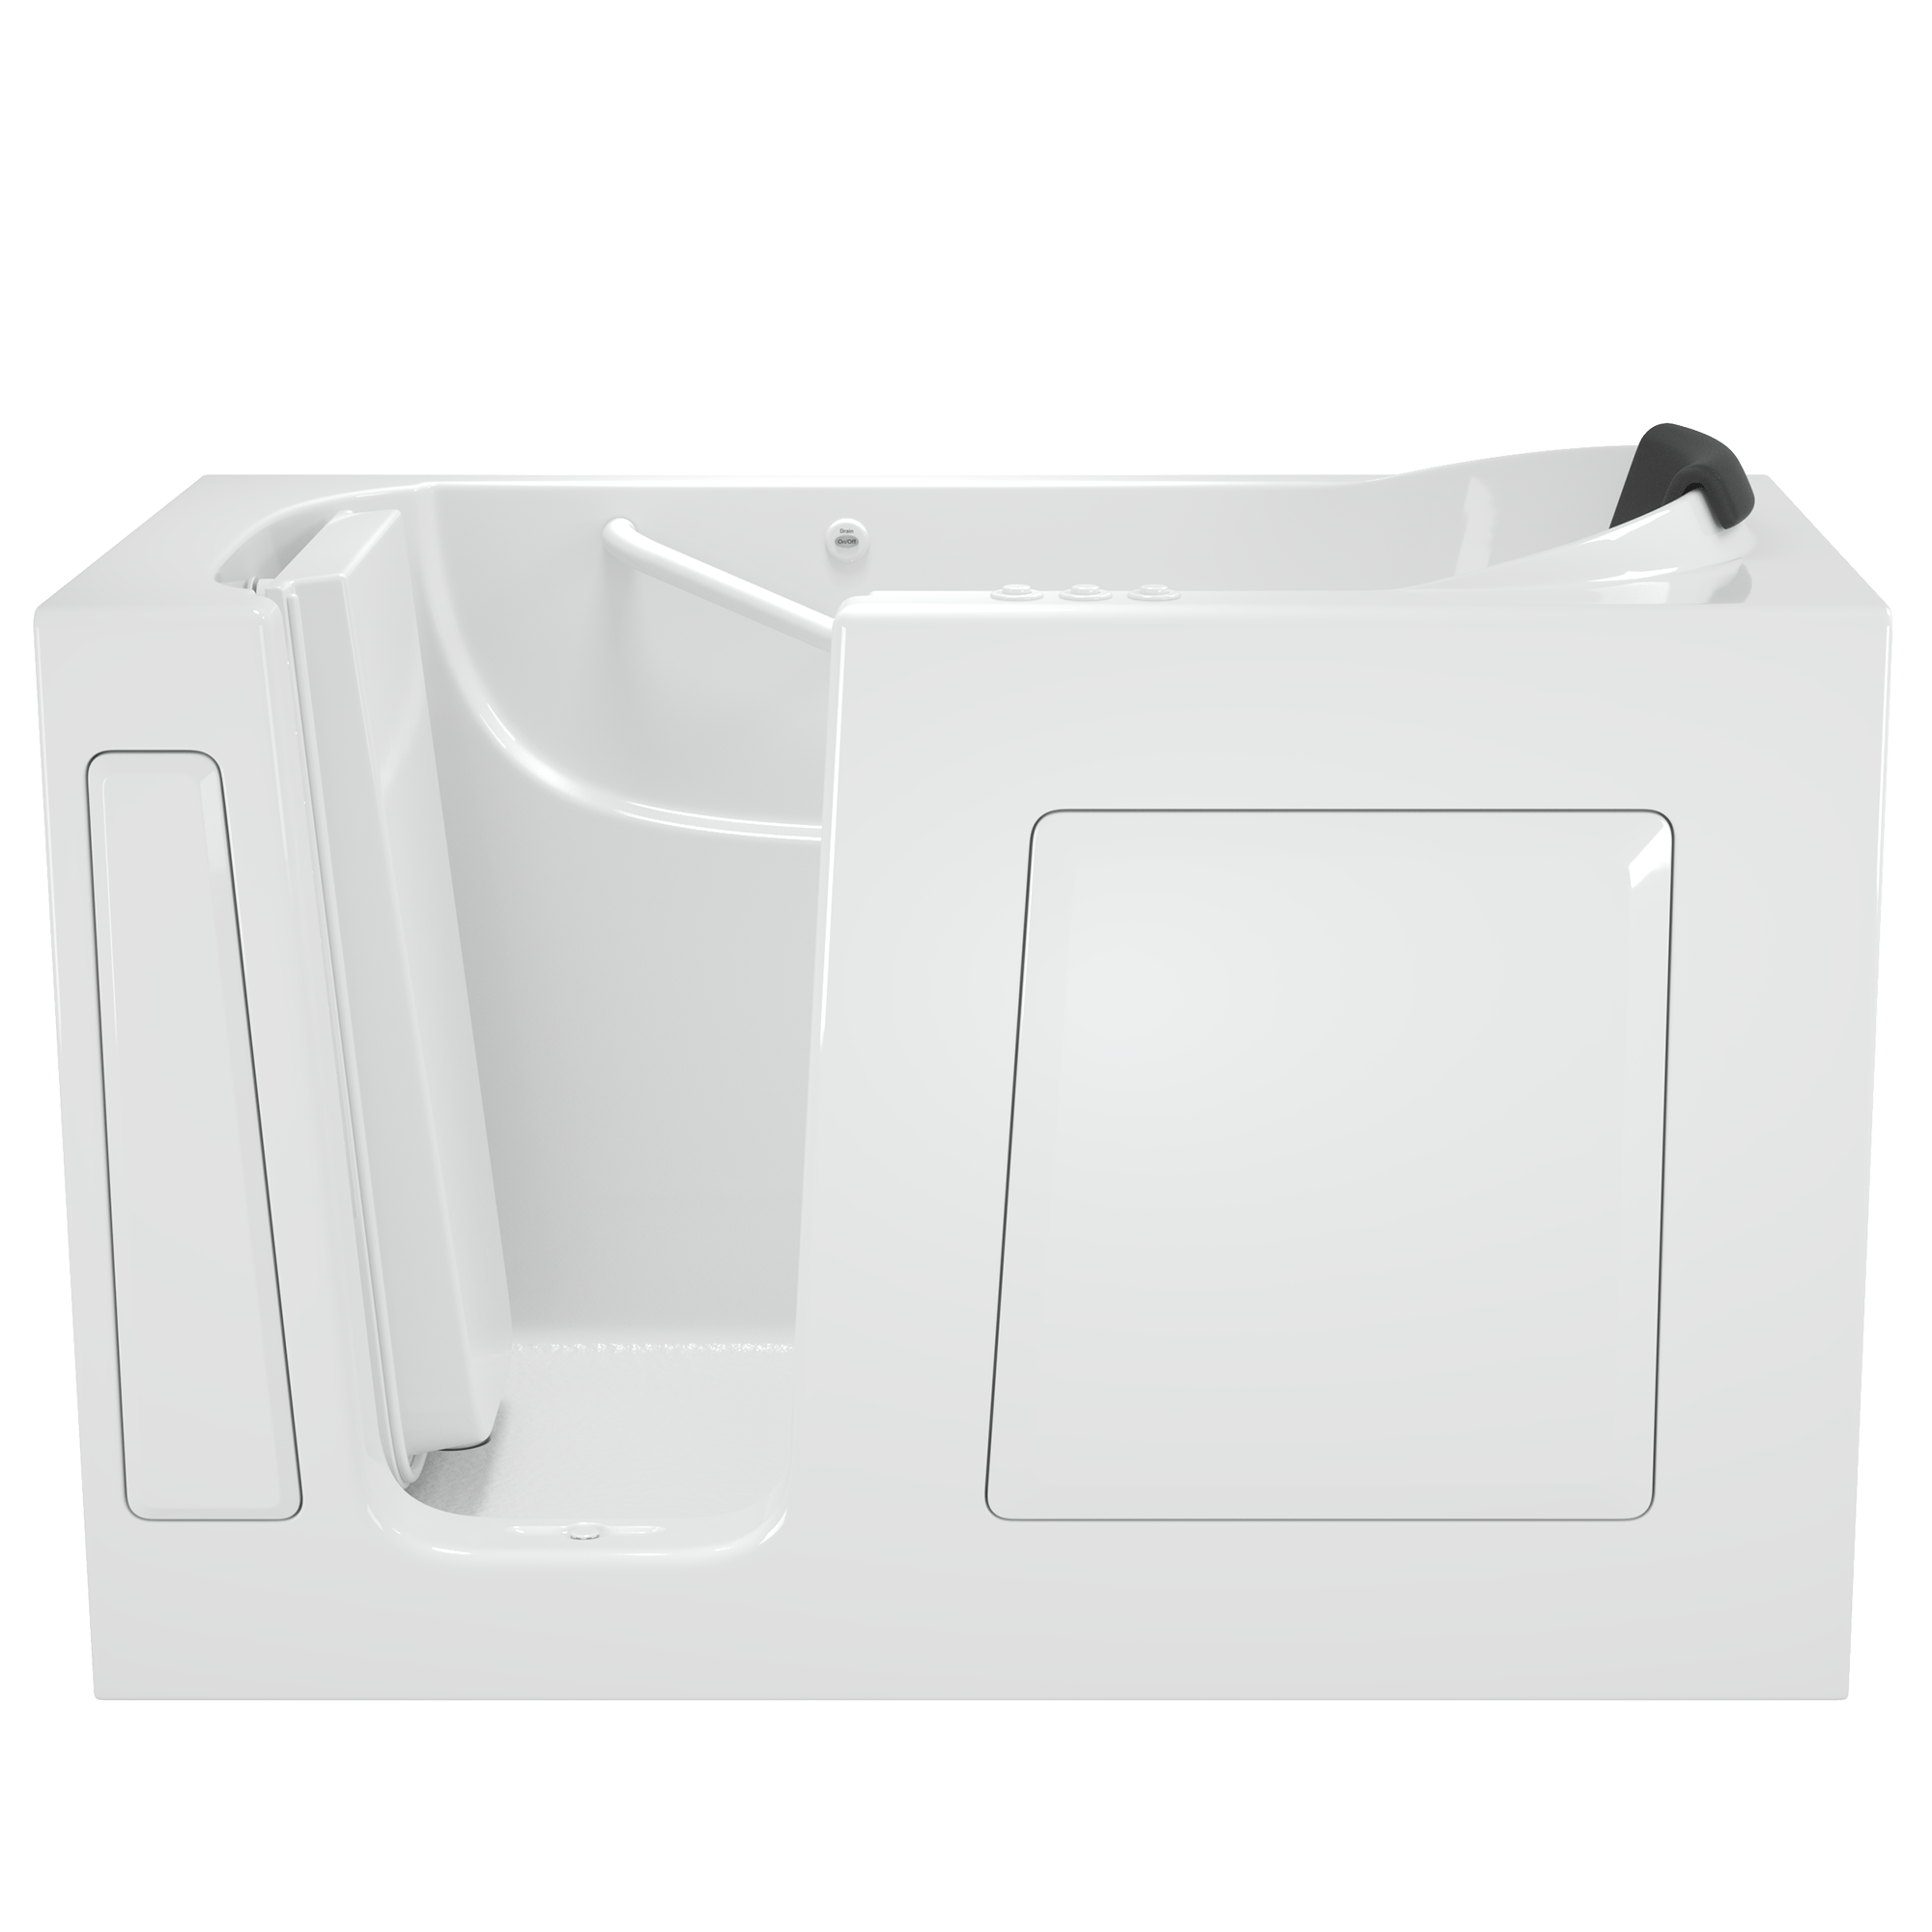 Gelcoat Premium Series 30 x 60  Inch Walk in Tub With Combination Air Spa and Whirlpool Systems   Left Hand Drain WIB WHITE